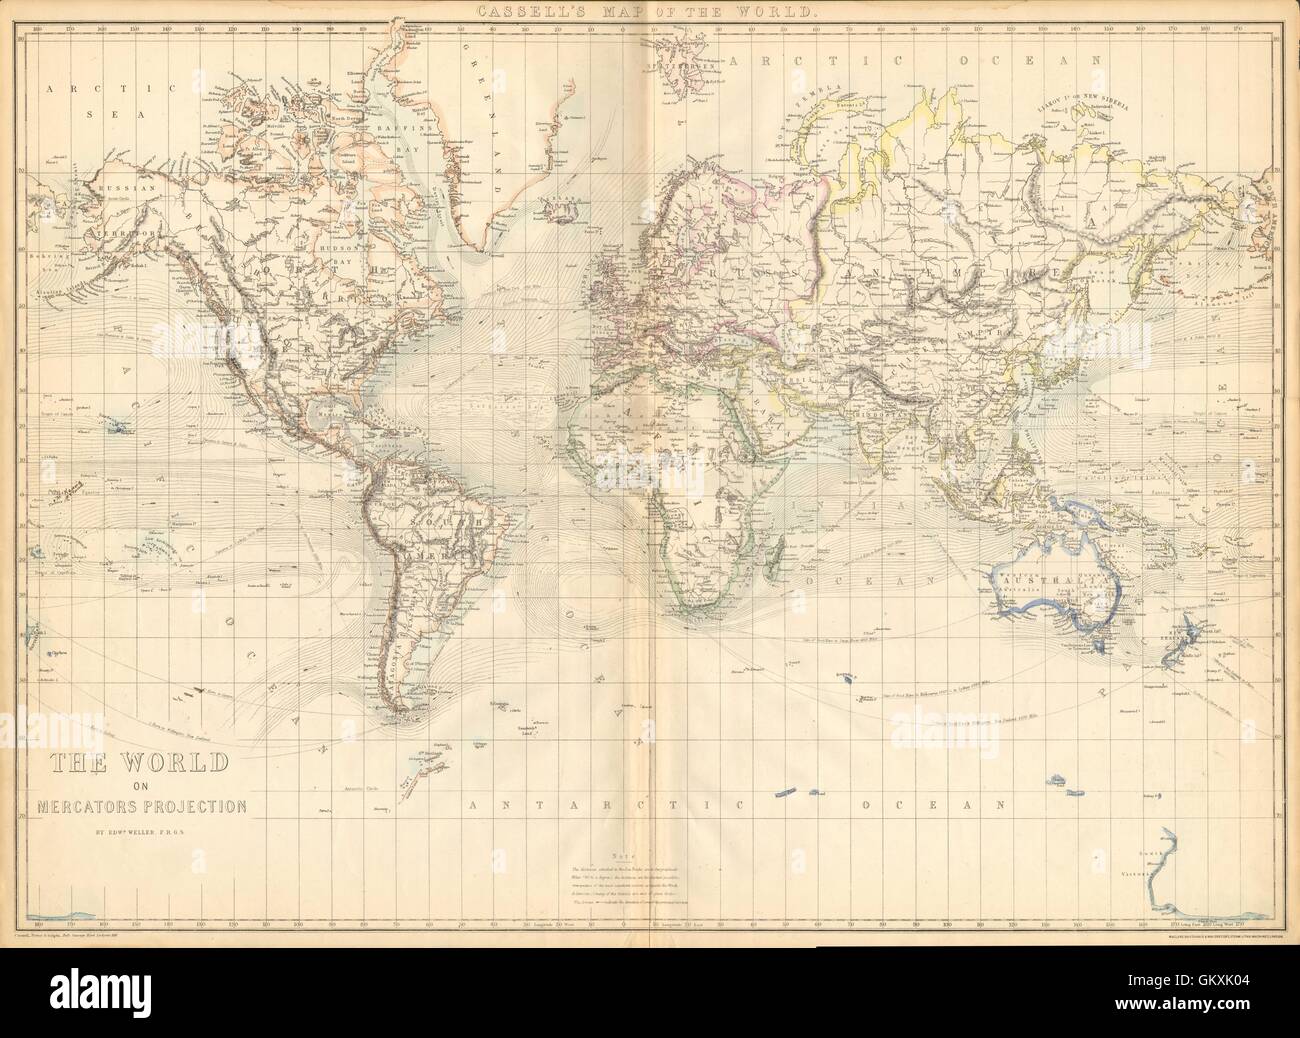 'The World on Mercators Projection'. Shows Mountains of Kong. WELLER, 1863 map Stock Photo